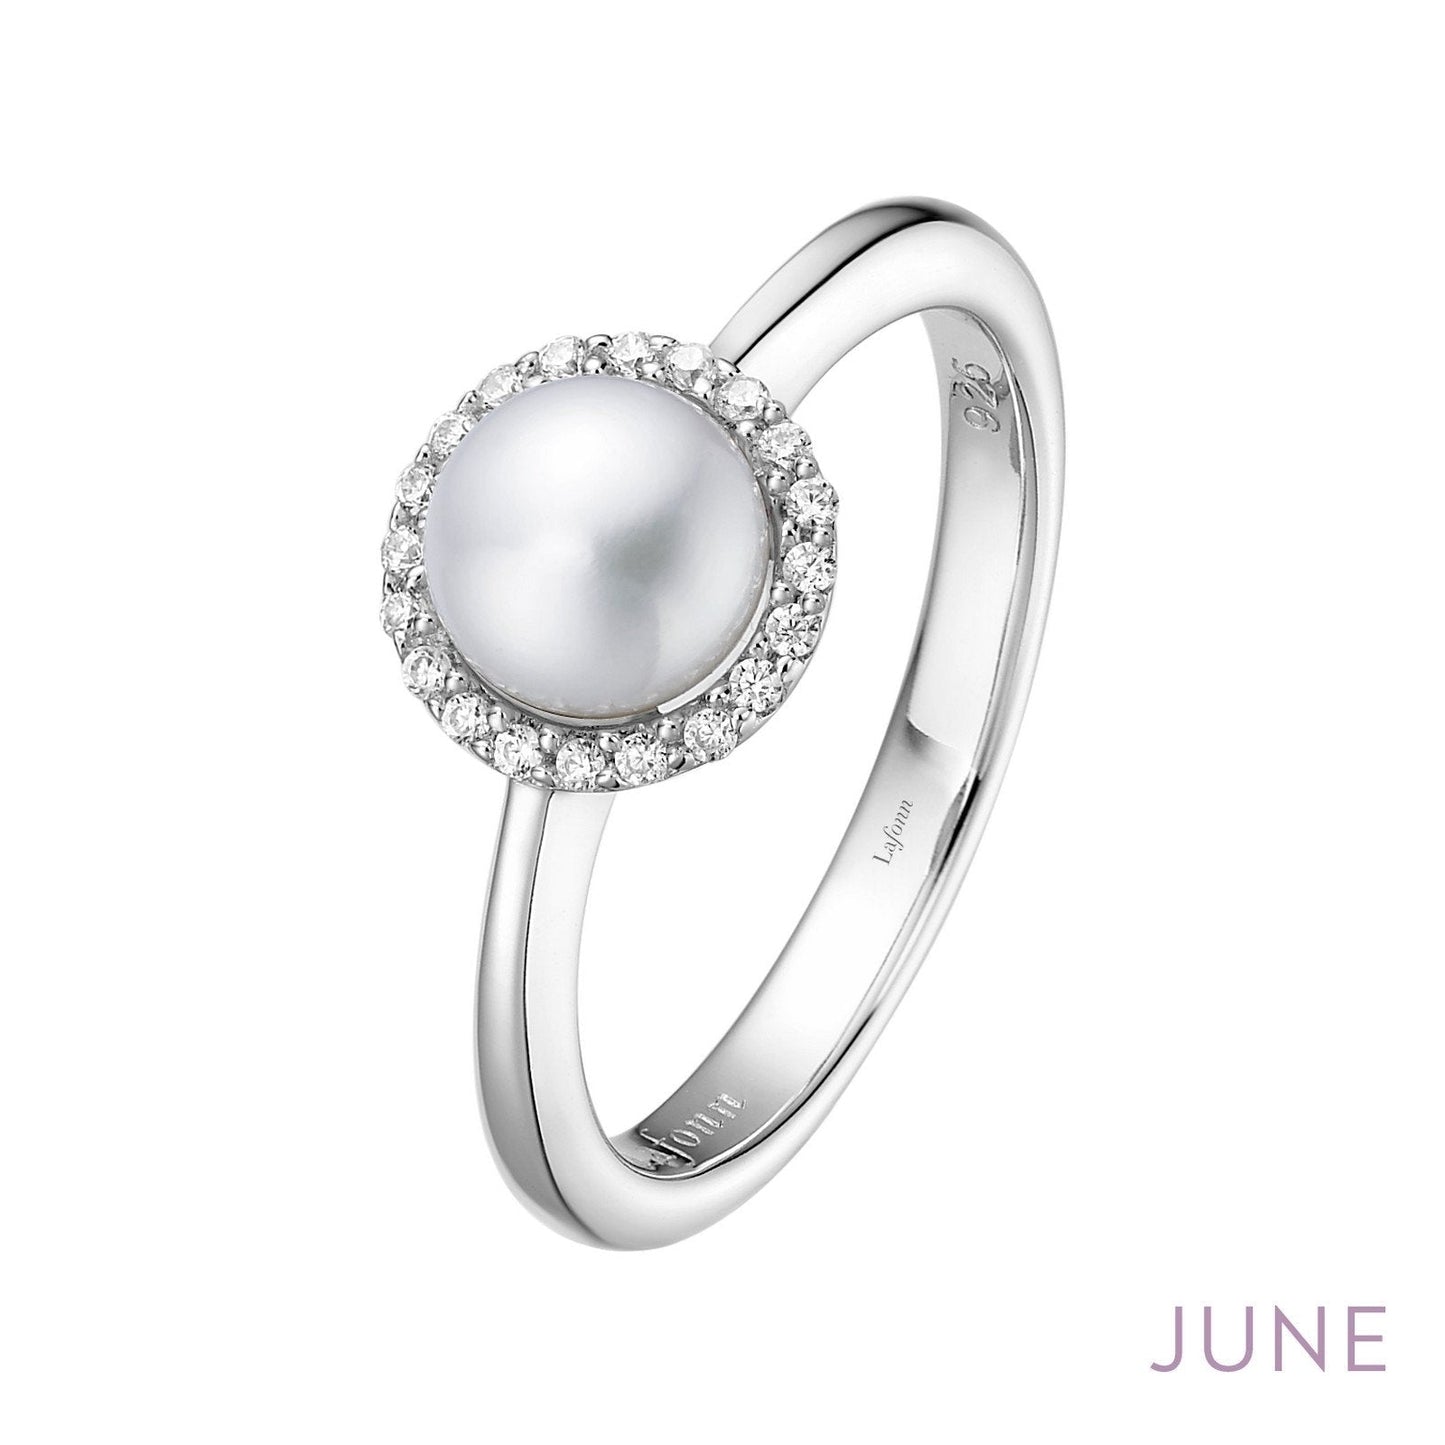 Lafonn June Birthstone Ring JUNE RINGS Size 5 Platinum Cultured Freshwater Pearl: 6mm.   Lassaire simulated diamonds: 0.20 cts. CTS 